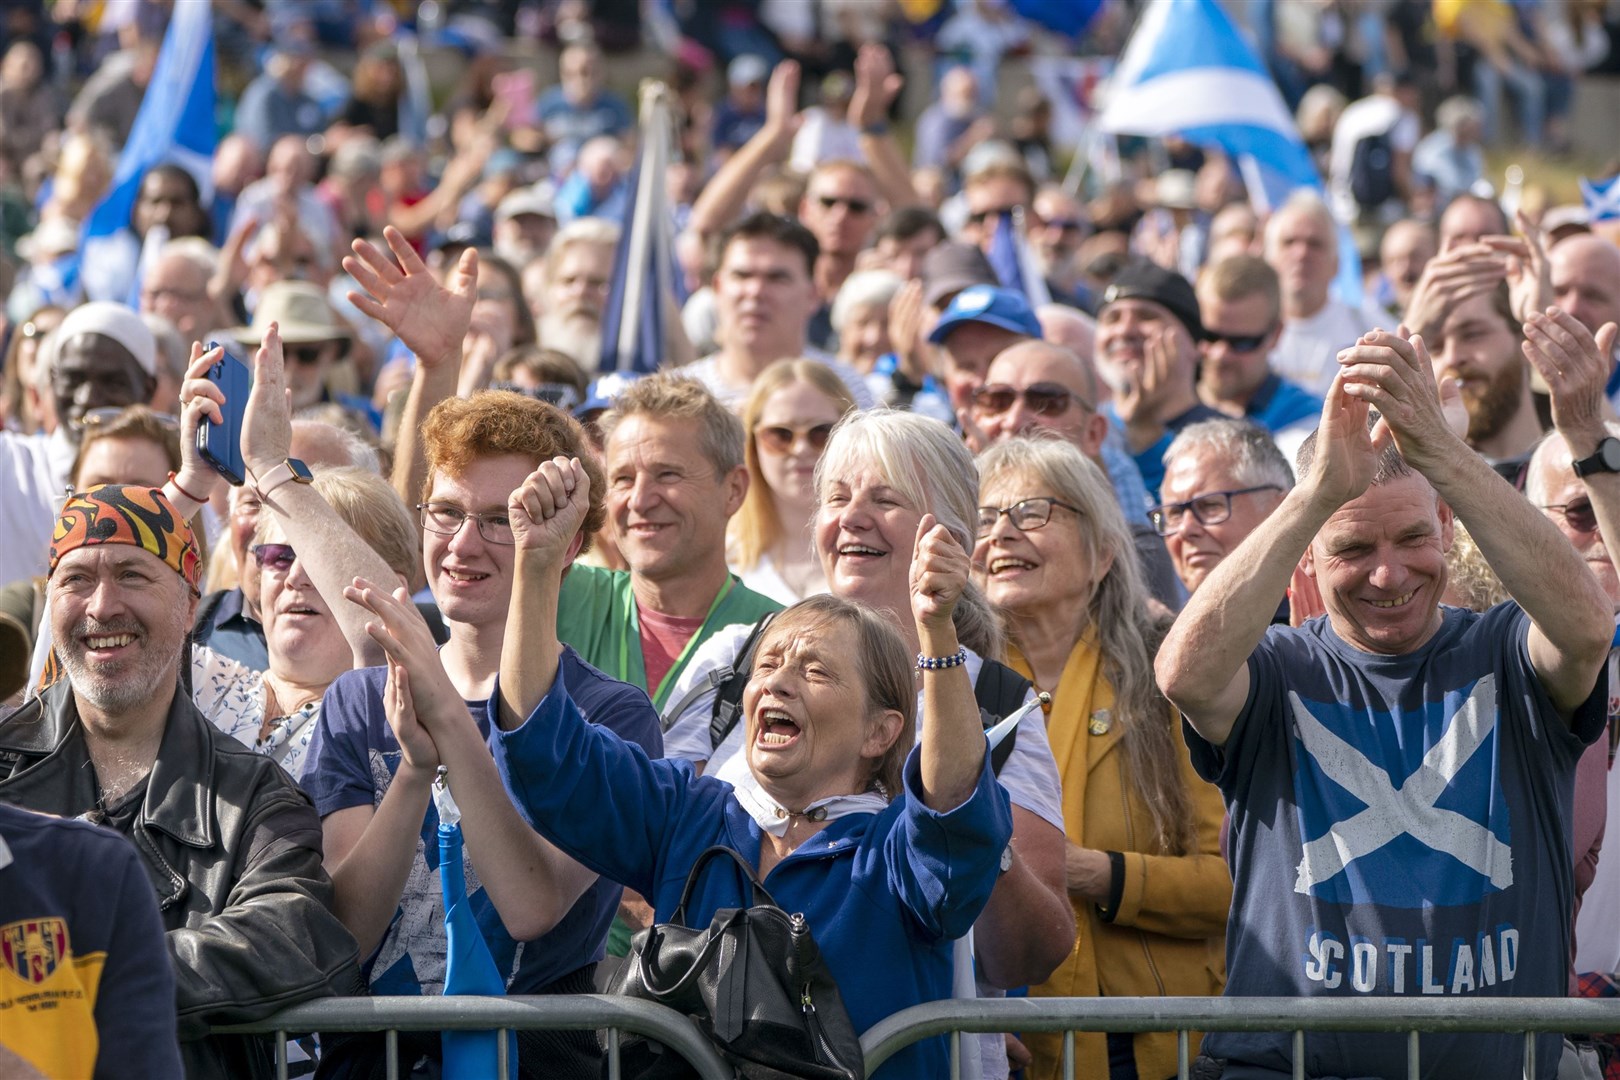 People take part in a Believe in Scotland march and rally from Edinburgh Castle (Jane Barlow/PA)